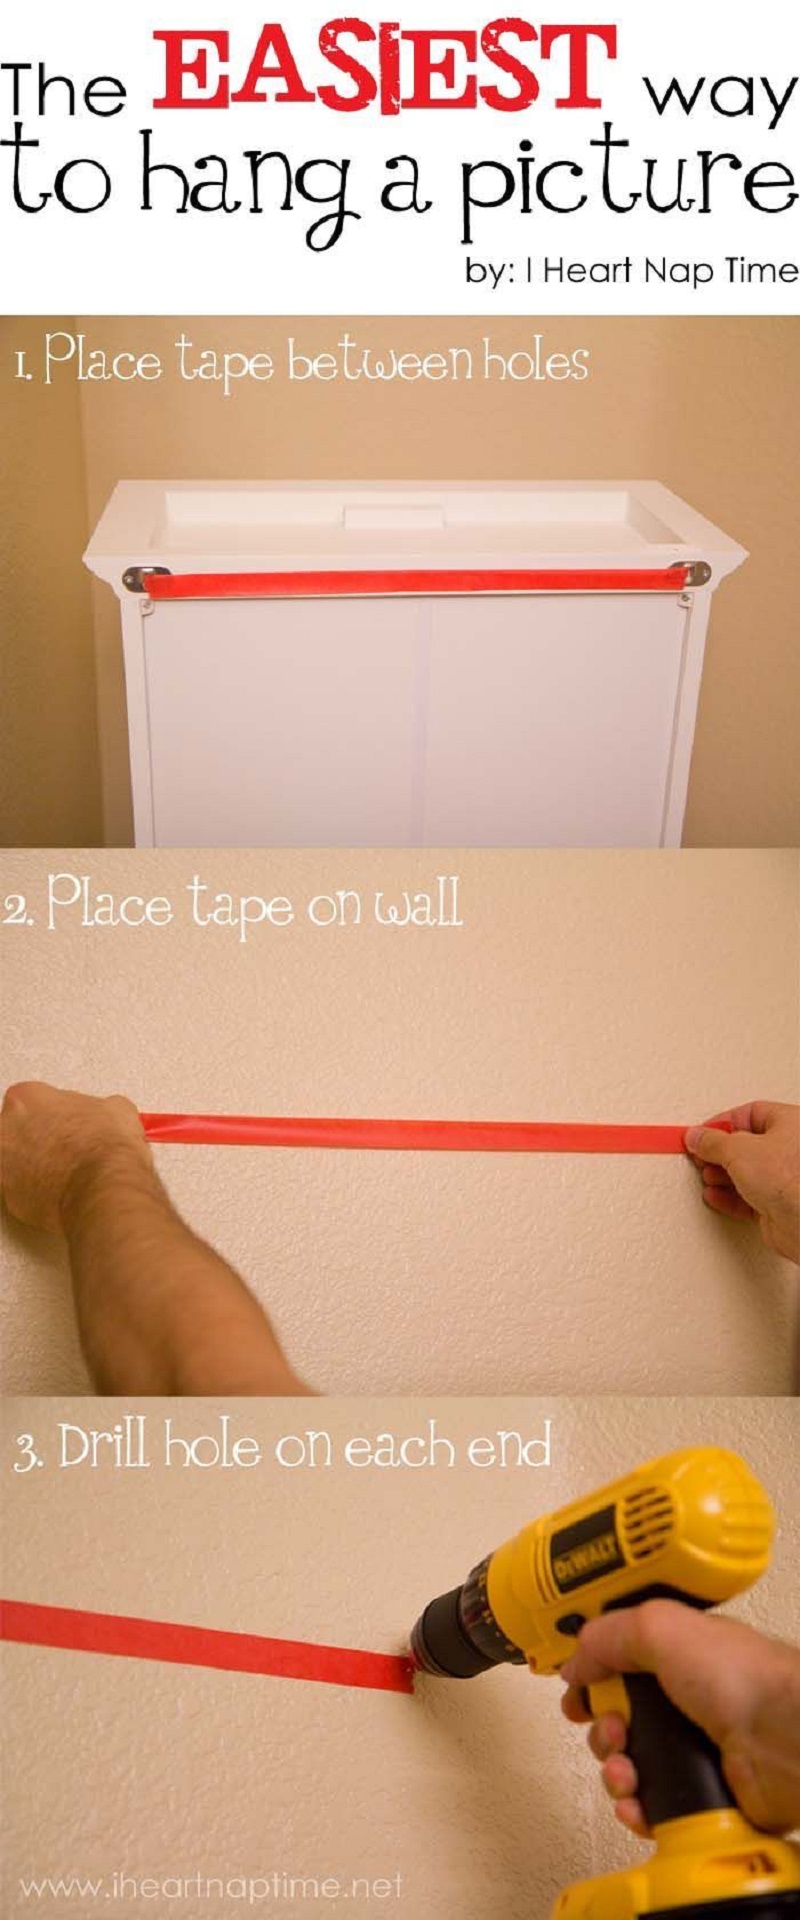 If you’re hanging something heavy on your walls, use tape to measure the distance between two holes.